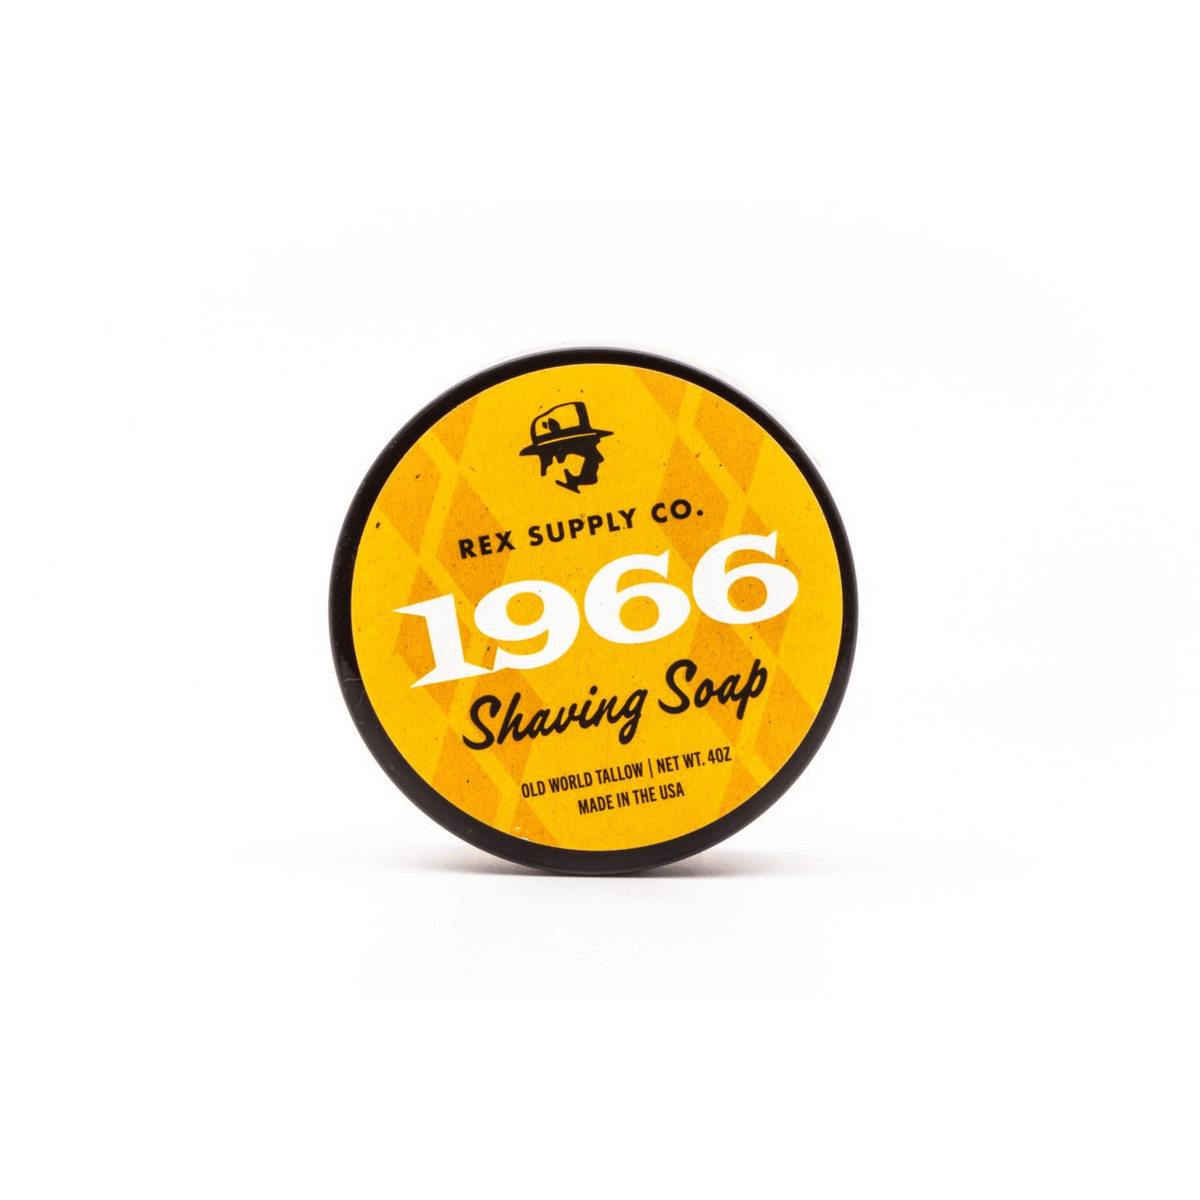 Primary Image of Shaving Soap - 1966